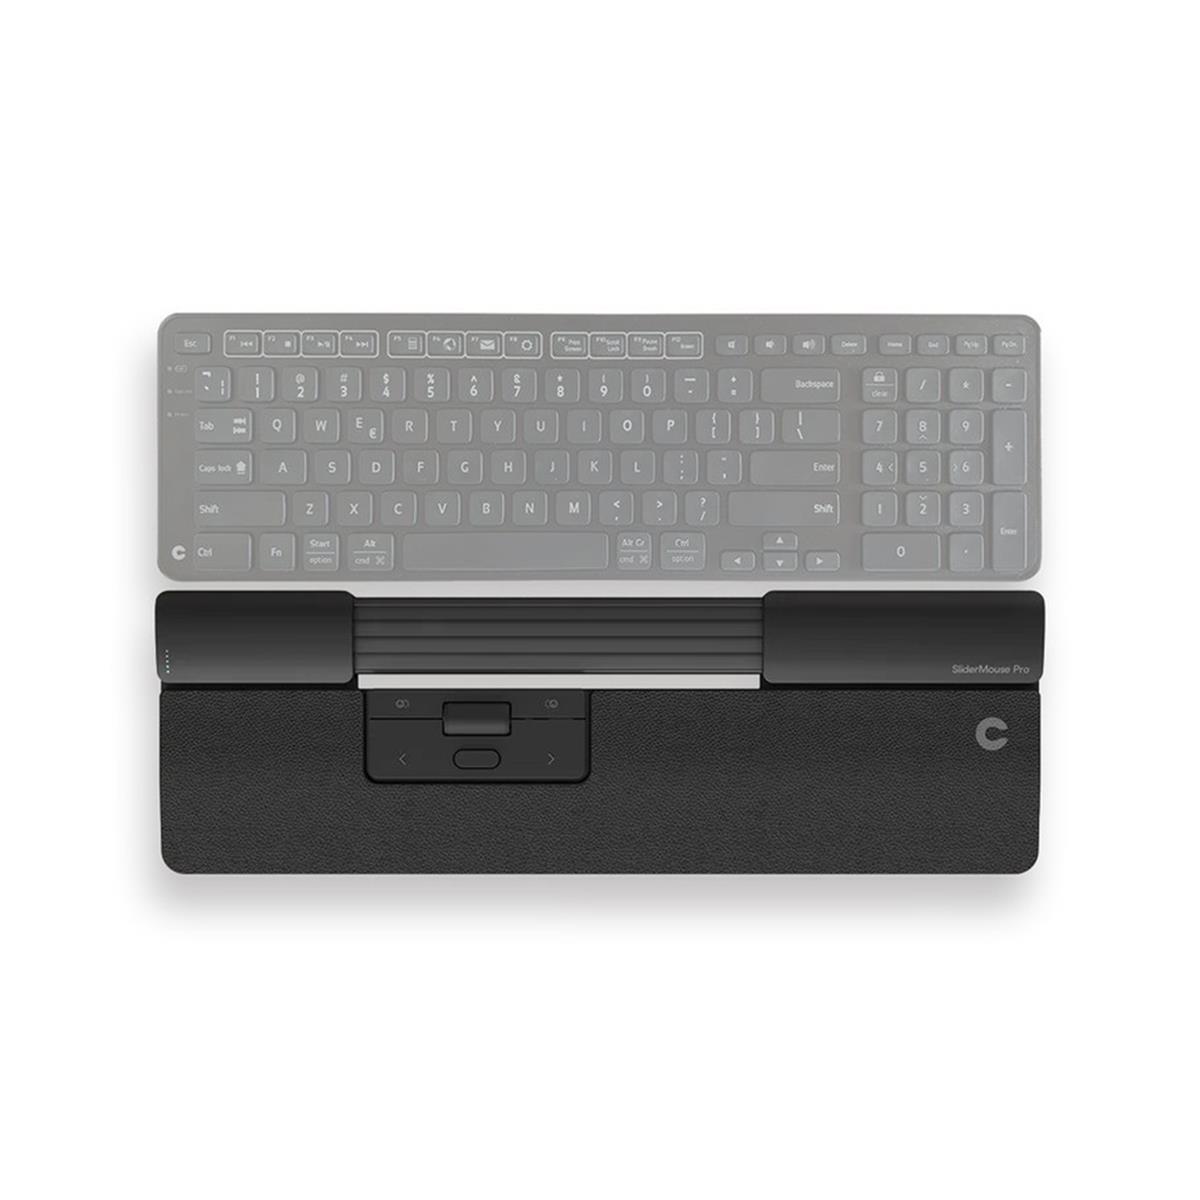 Image of Contour Design Wired SliderMouse Pro with Vegan Leather Wrist Rest Slim